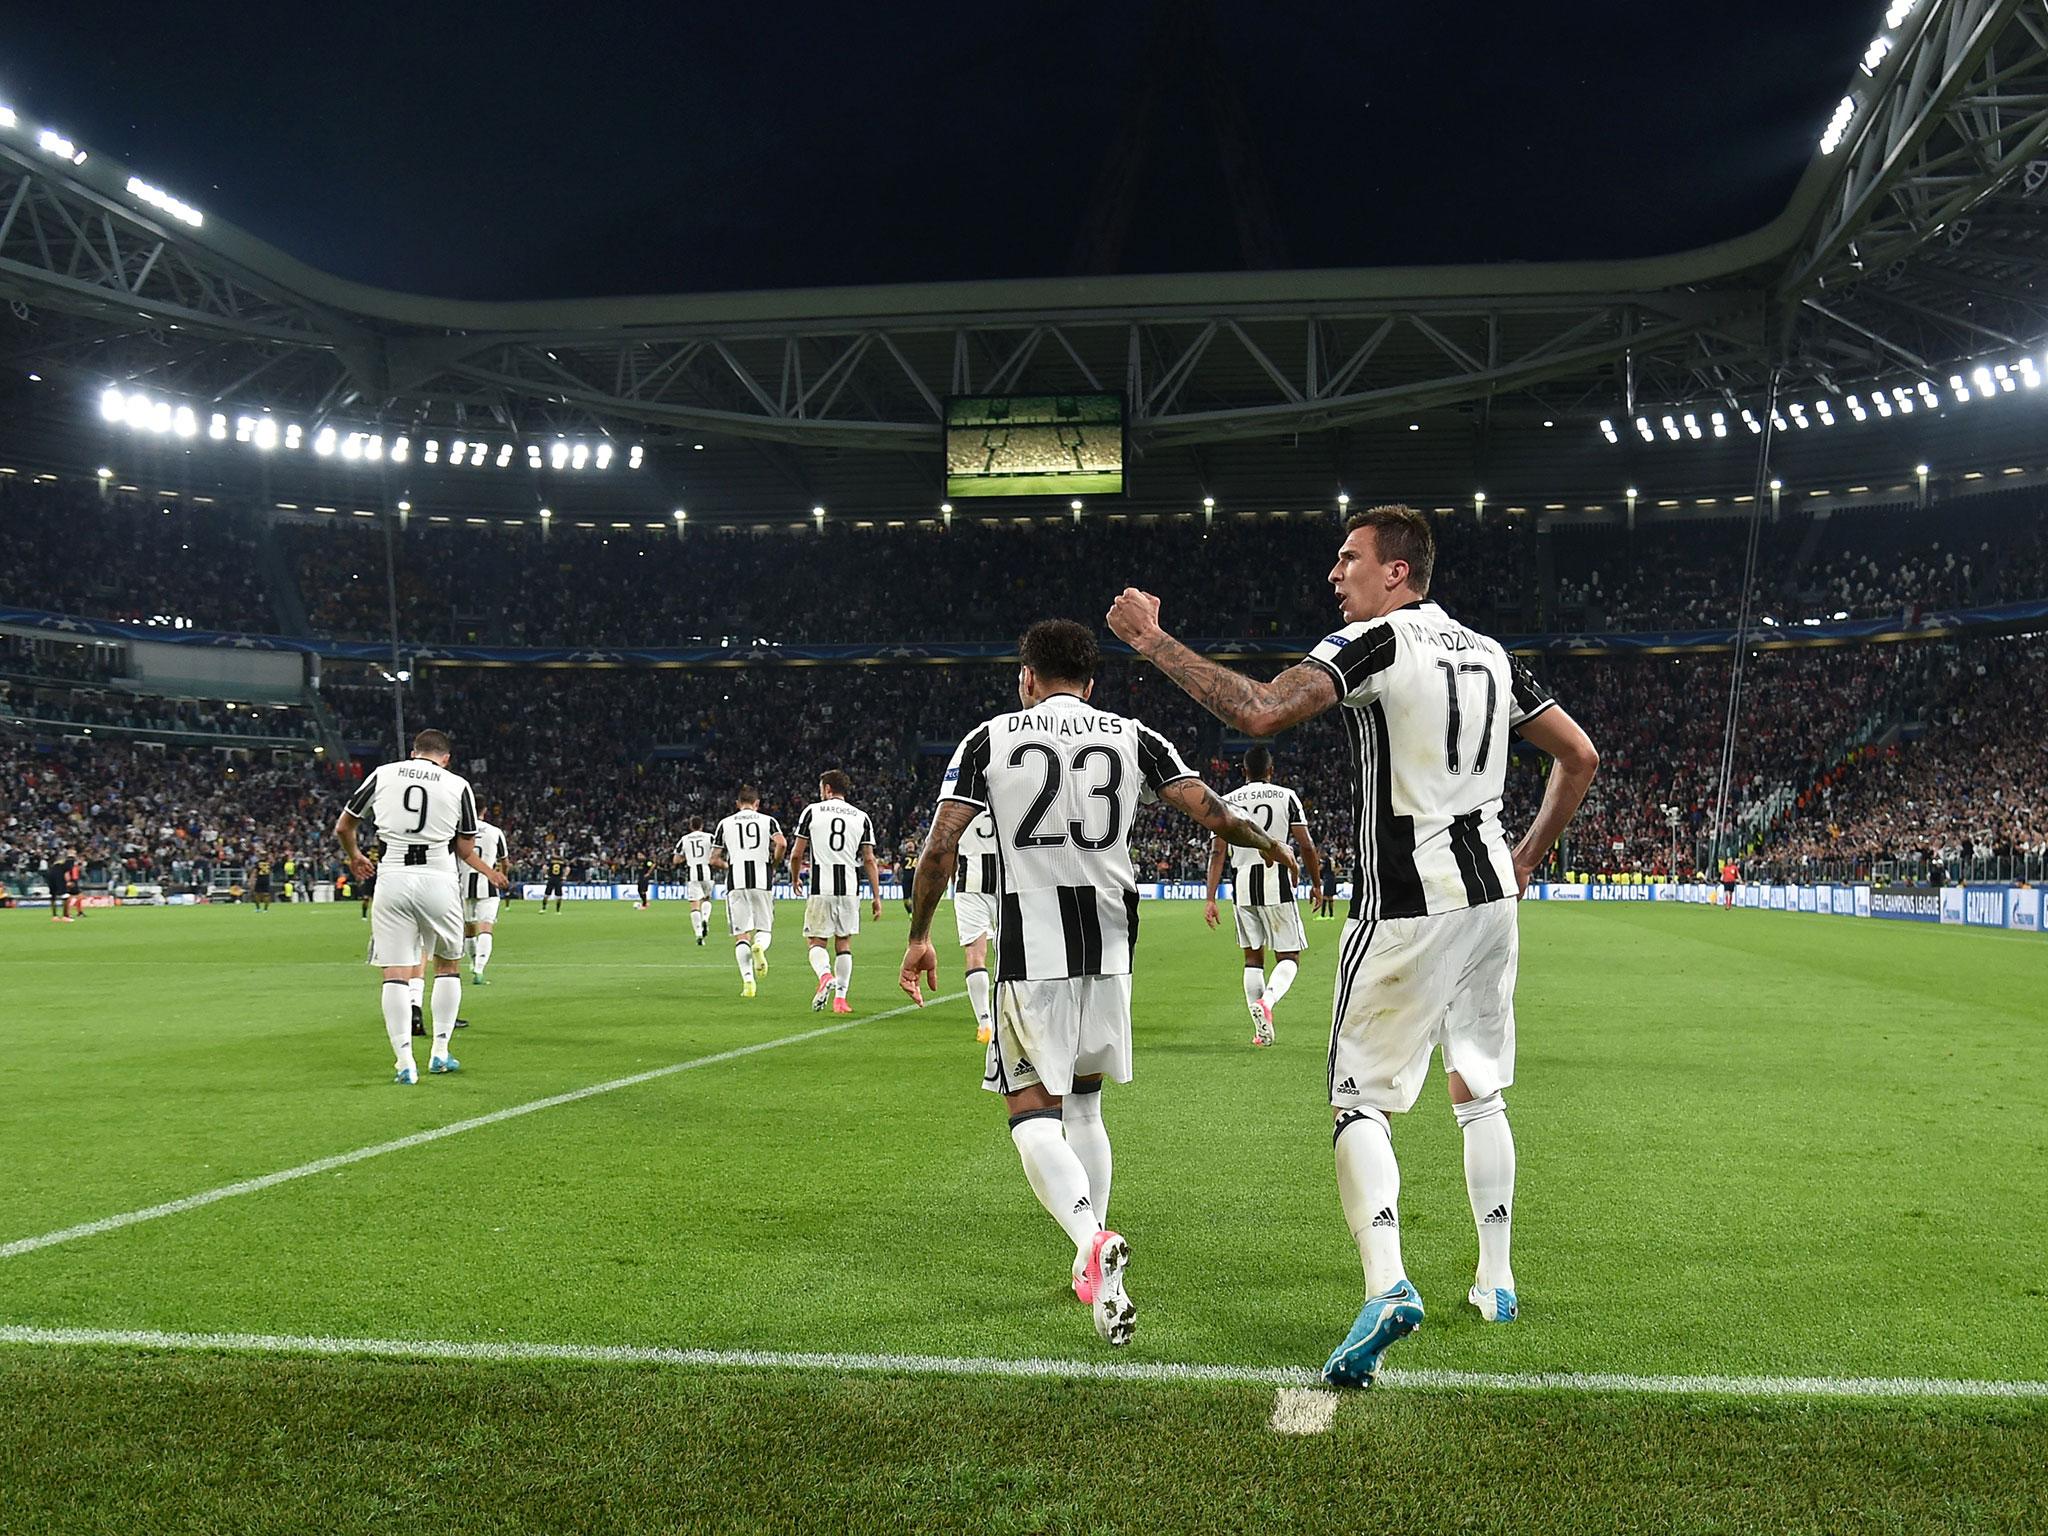 Juventus are in control of the tie after an impressive performance in the first leg